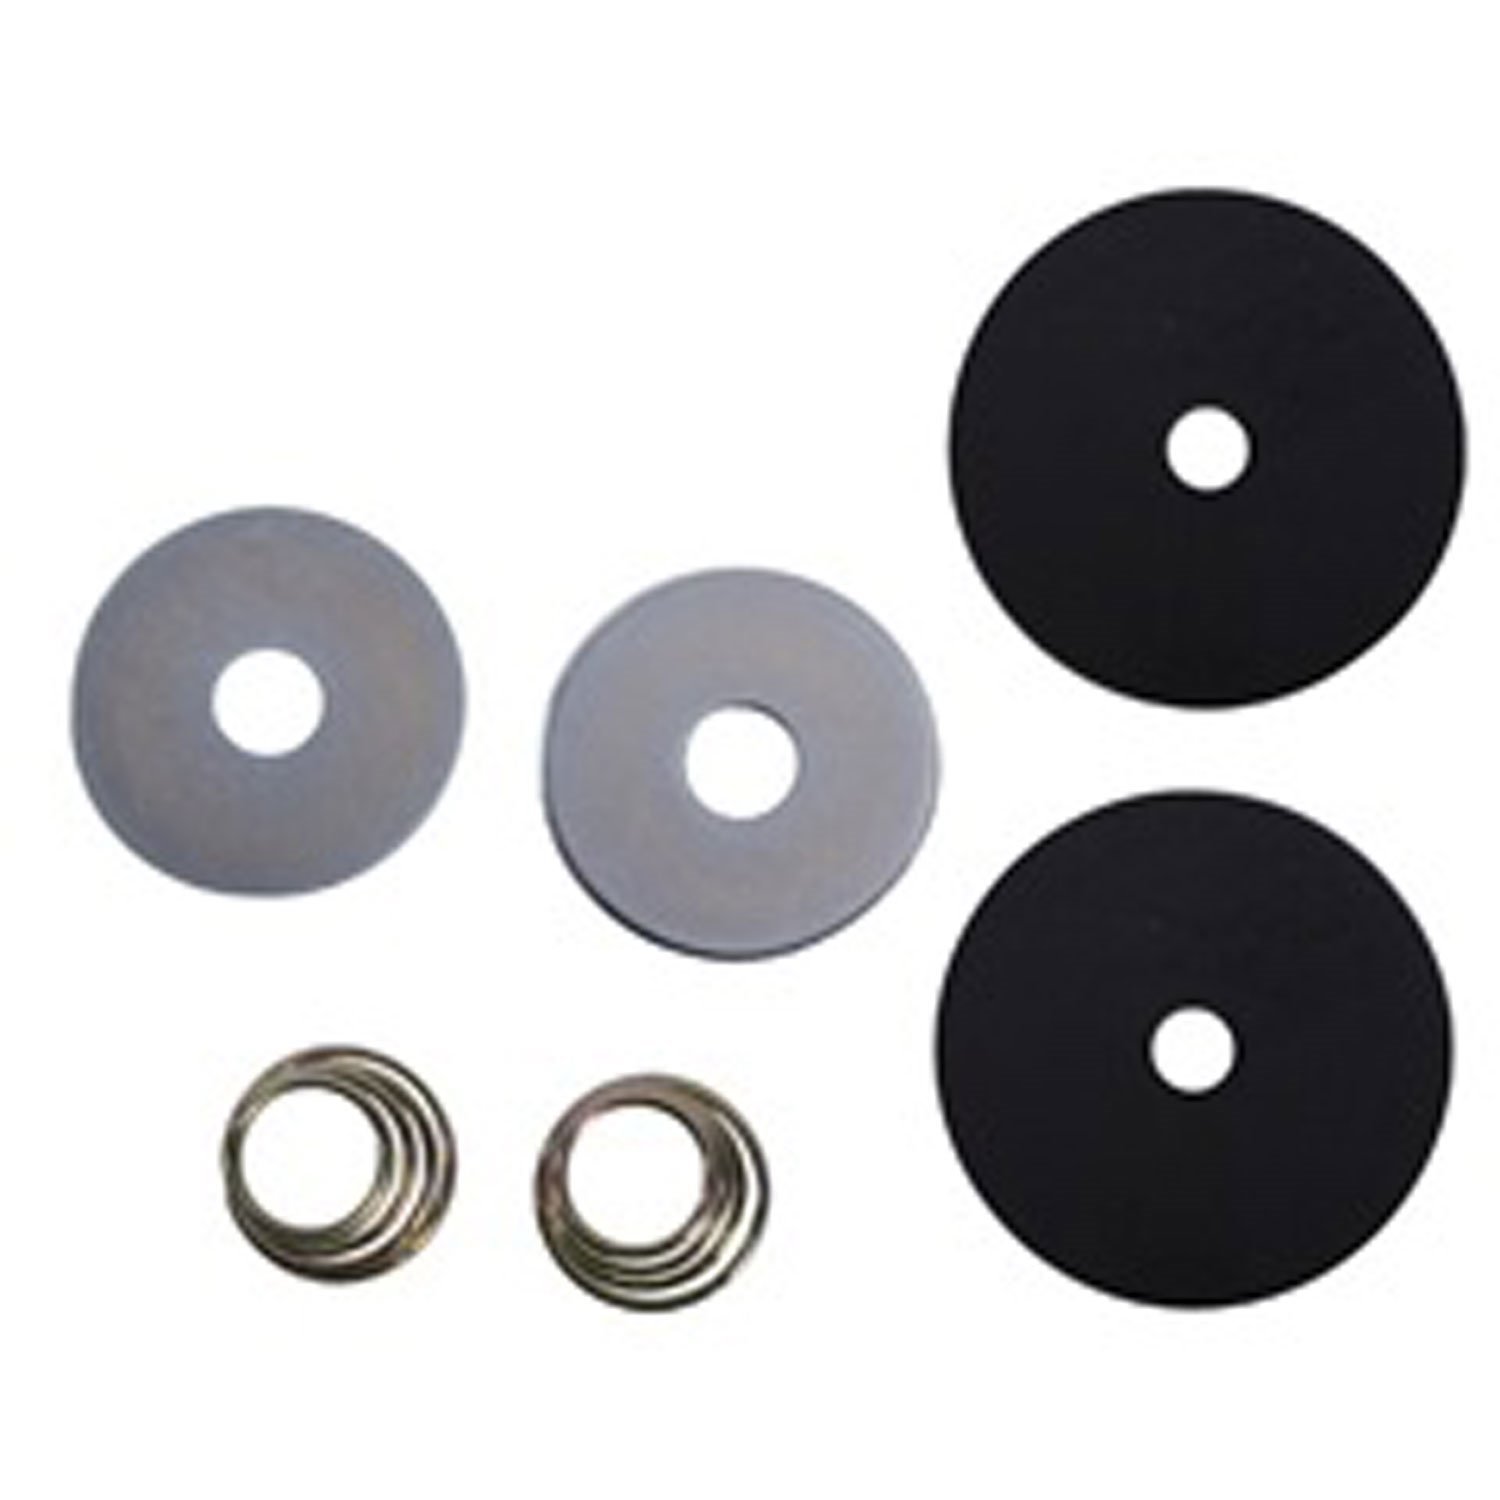 This pedal draft pad kit from Omix-ADA includes 2 springs 2 washers and 2 rubber pads. Fits 41-68 Willys and Jeep models.